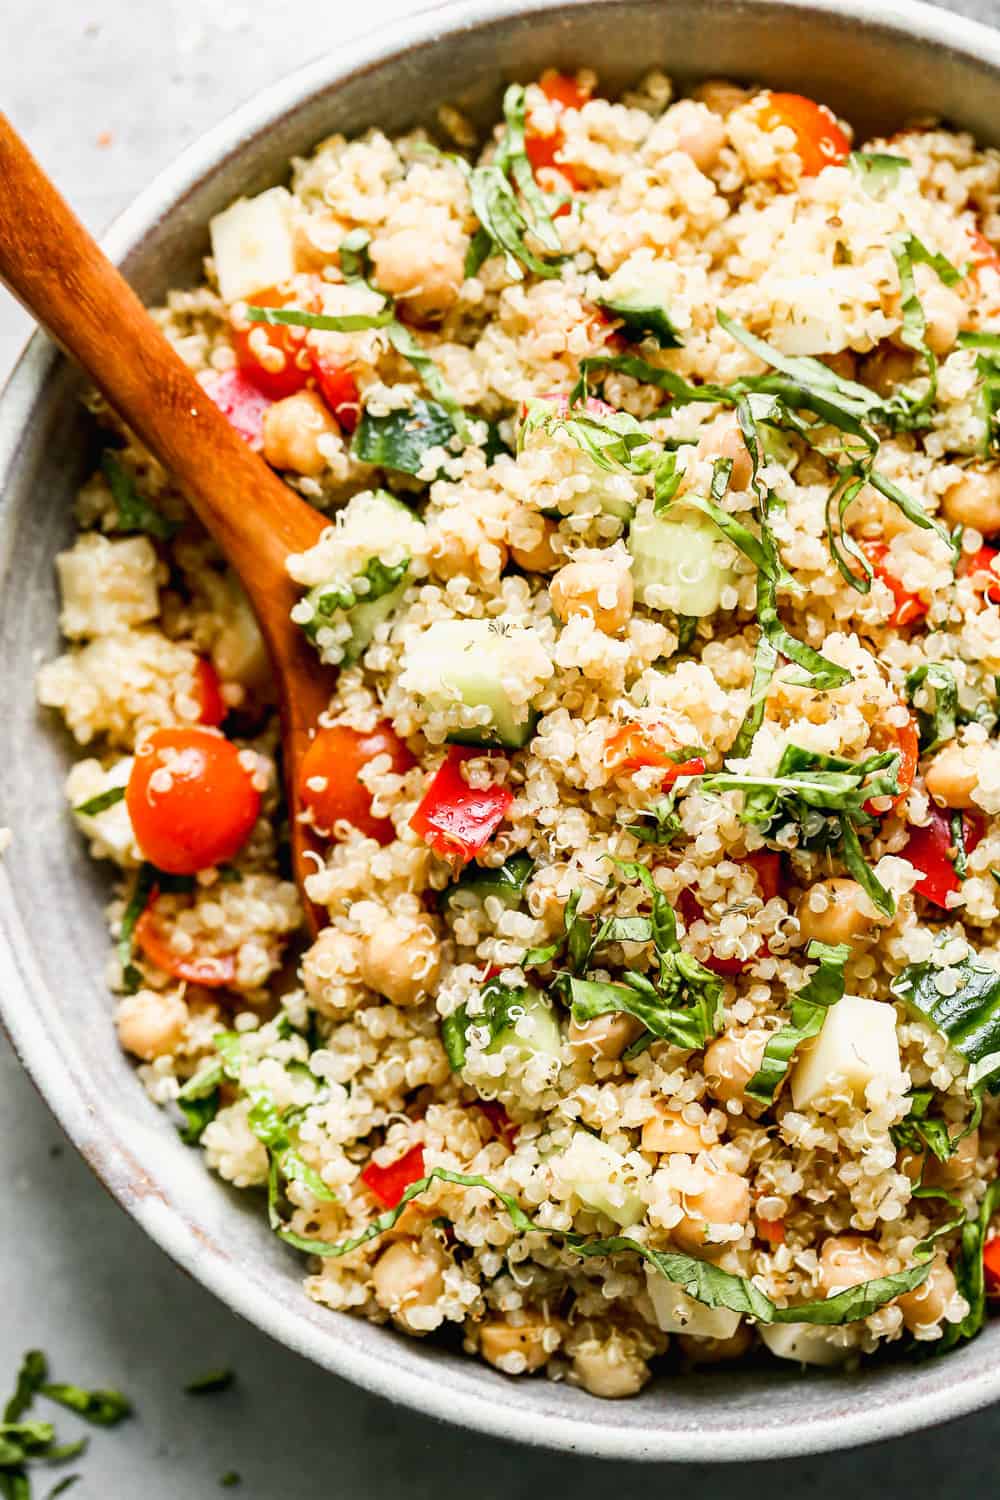 Packed with fuffy quinoa, crisp veggies, chickpeas, salty provolone cheese, and a zesty lemon vinaigrette, this easy Quinoa Salad is the perfect lunch on its own, or base for chicken, salmon or steak for dinner. 30 minutes and done!